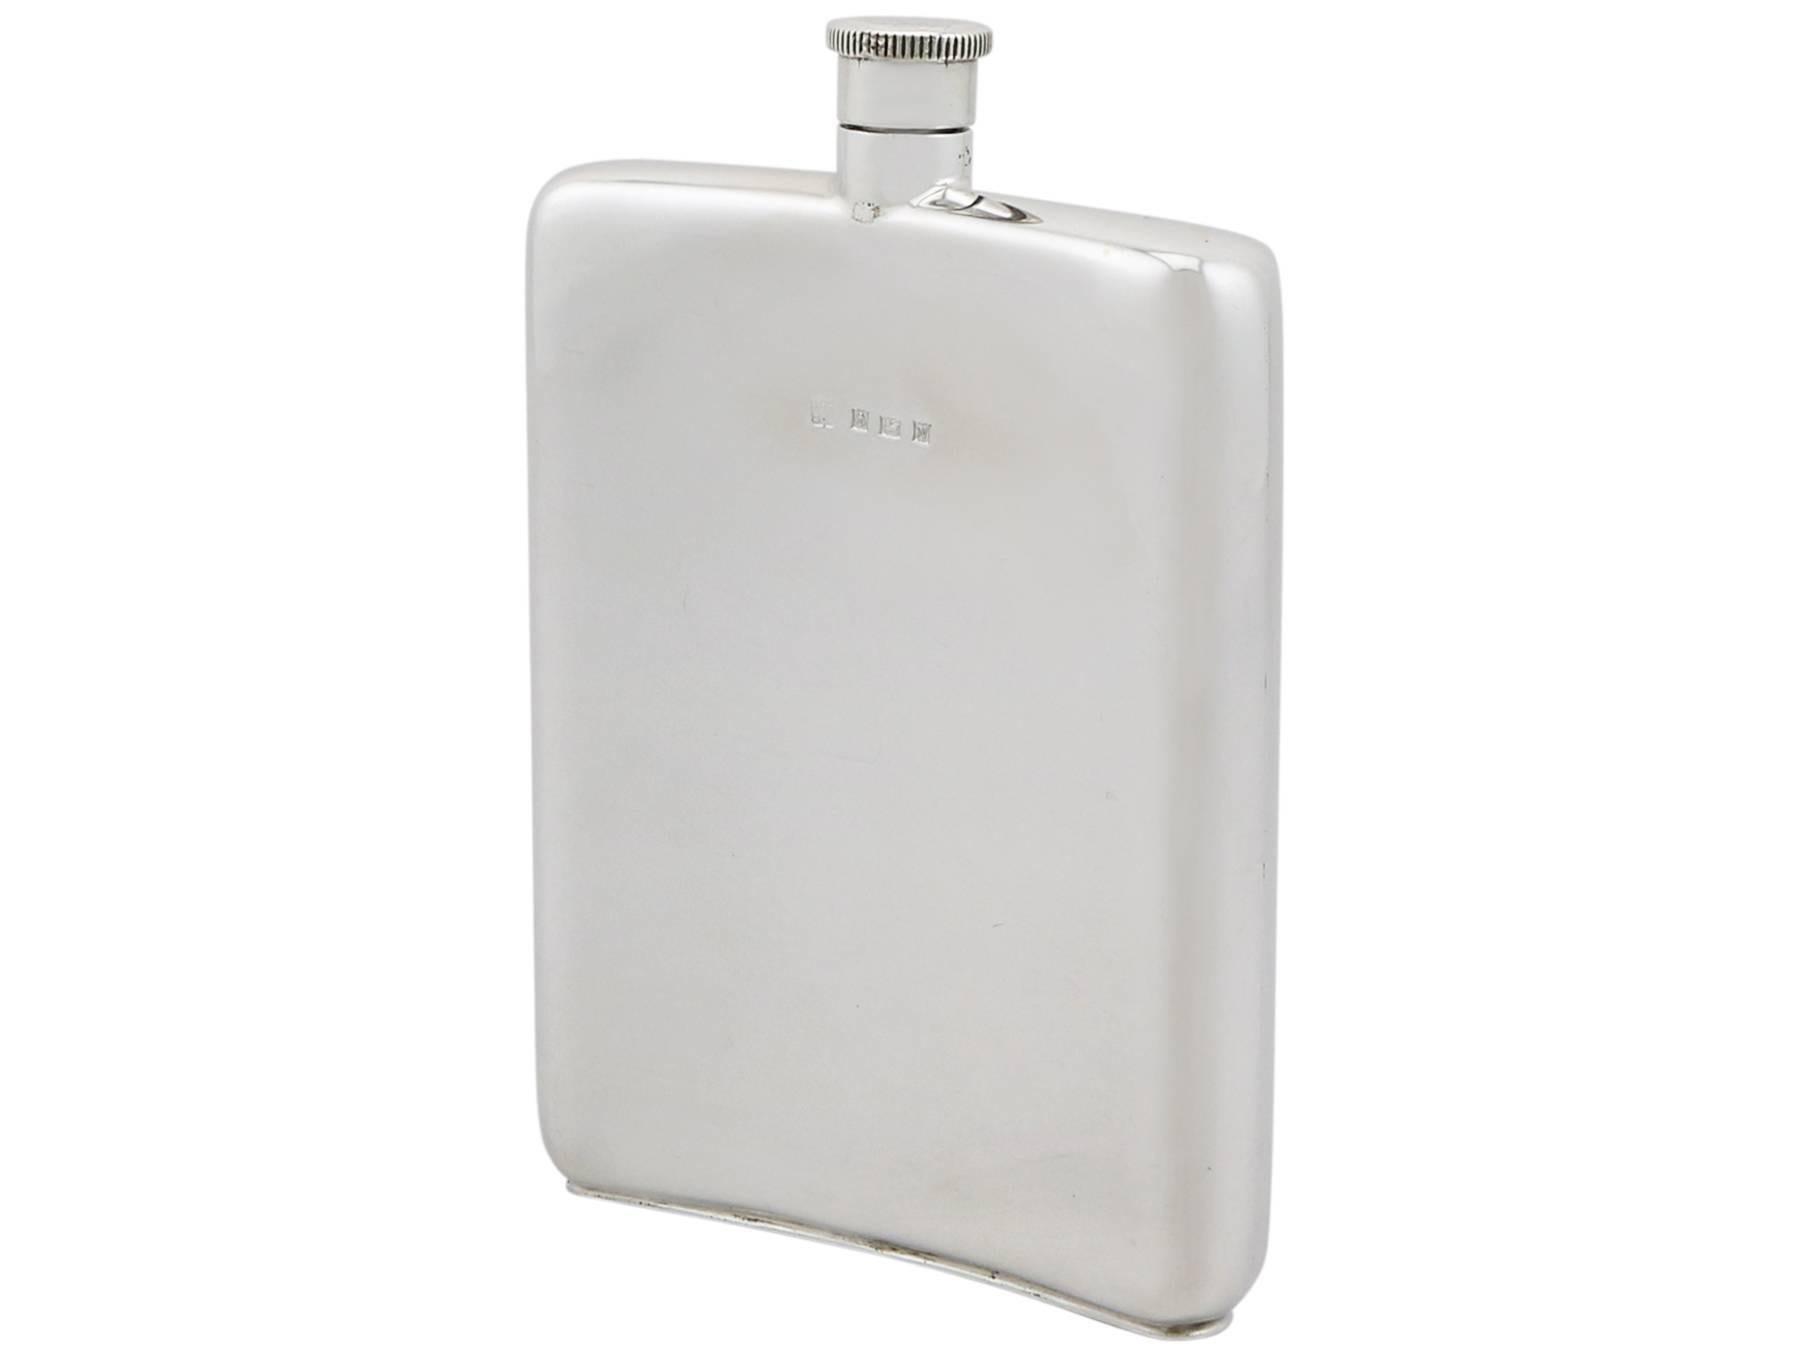 An exceptional, fine and impressive vintage Elizabeth II English sterling silver hip flask made by Charles S Green & Co Ltd; part of our wine and drinks related silverware collection.

This exceptional vintage Elizabeth II sterling silver hip